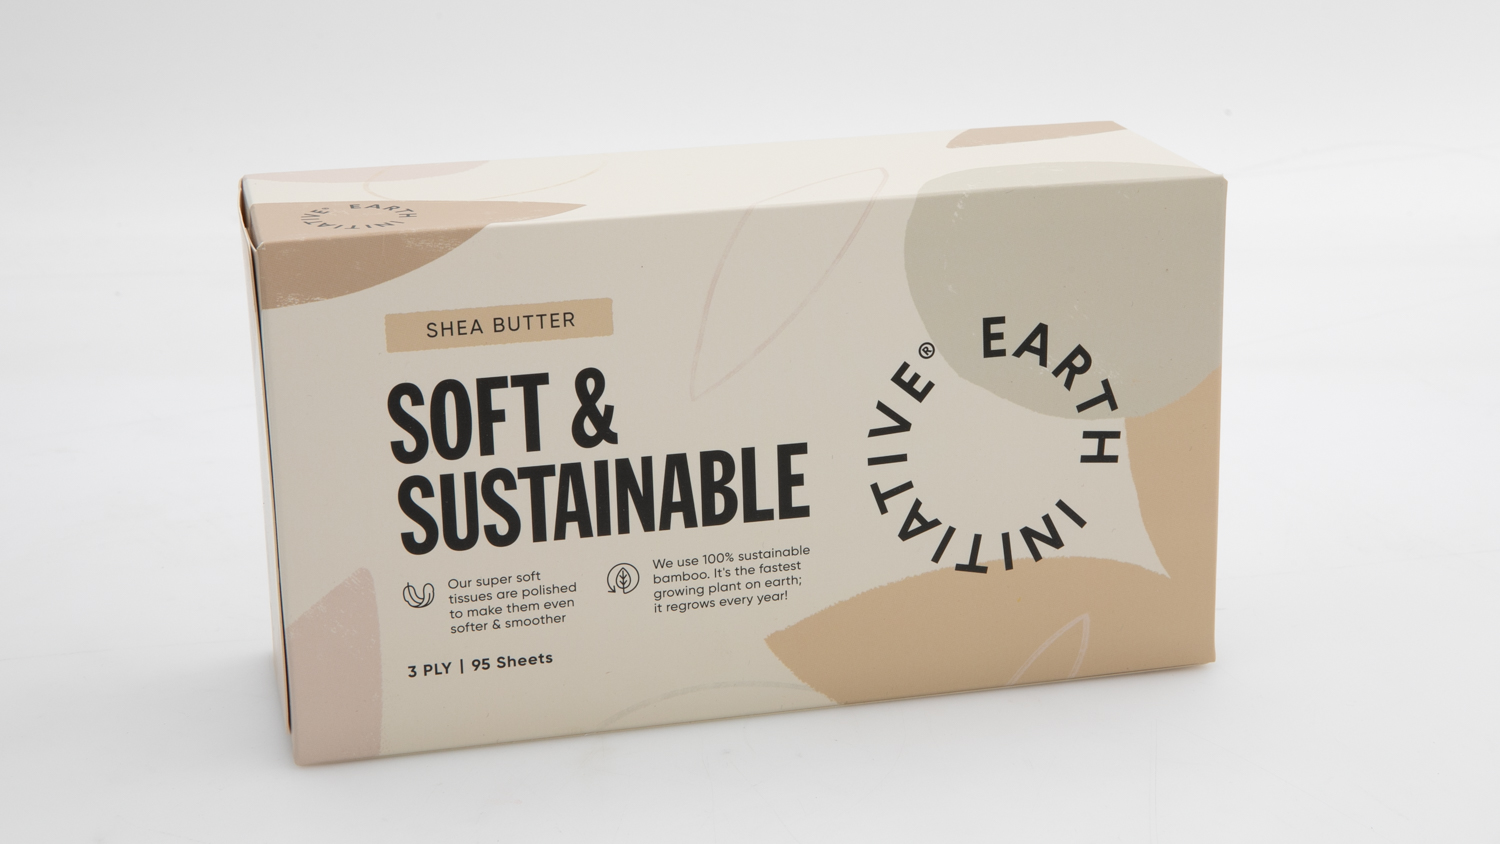 Earth Initiative Soft & Sustainable Shea Butter 95 sheets carousel image